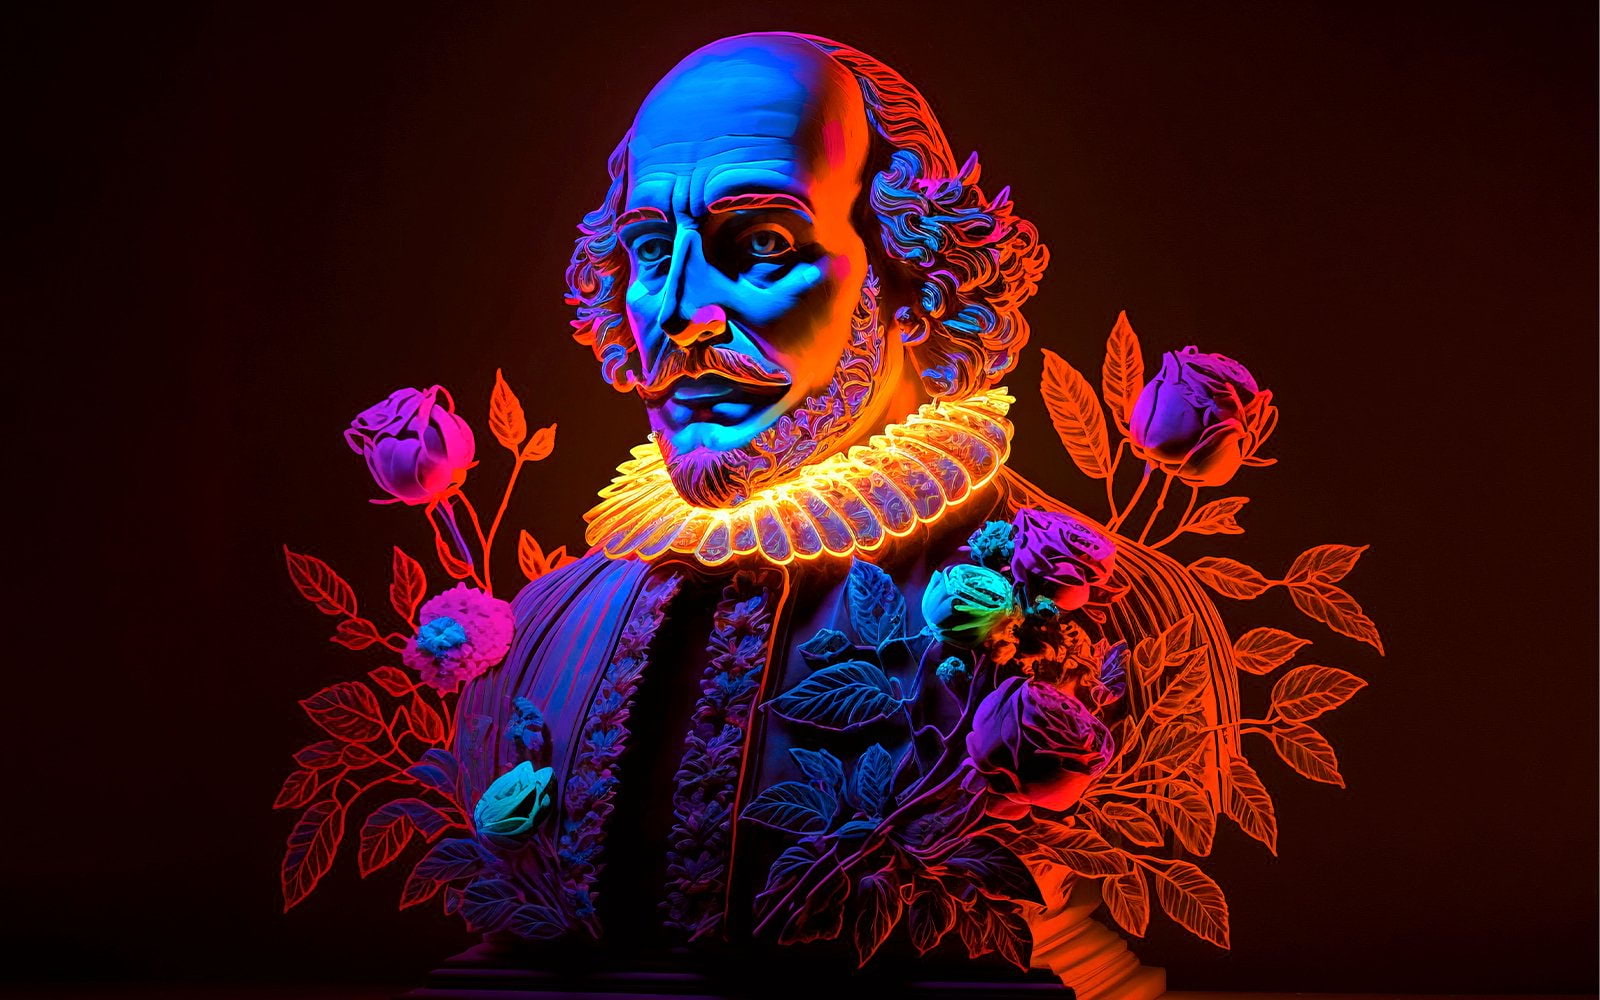 The Museum of Shakespeare will open in 2025